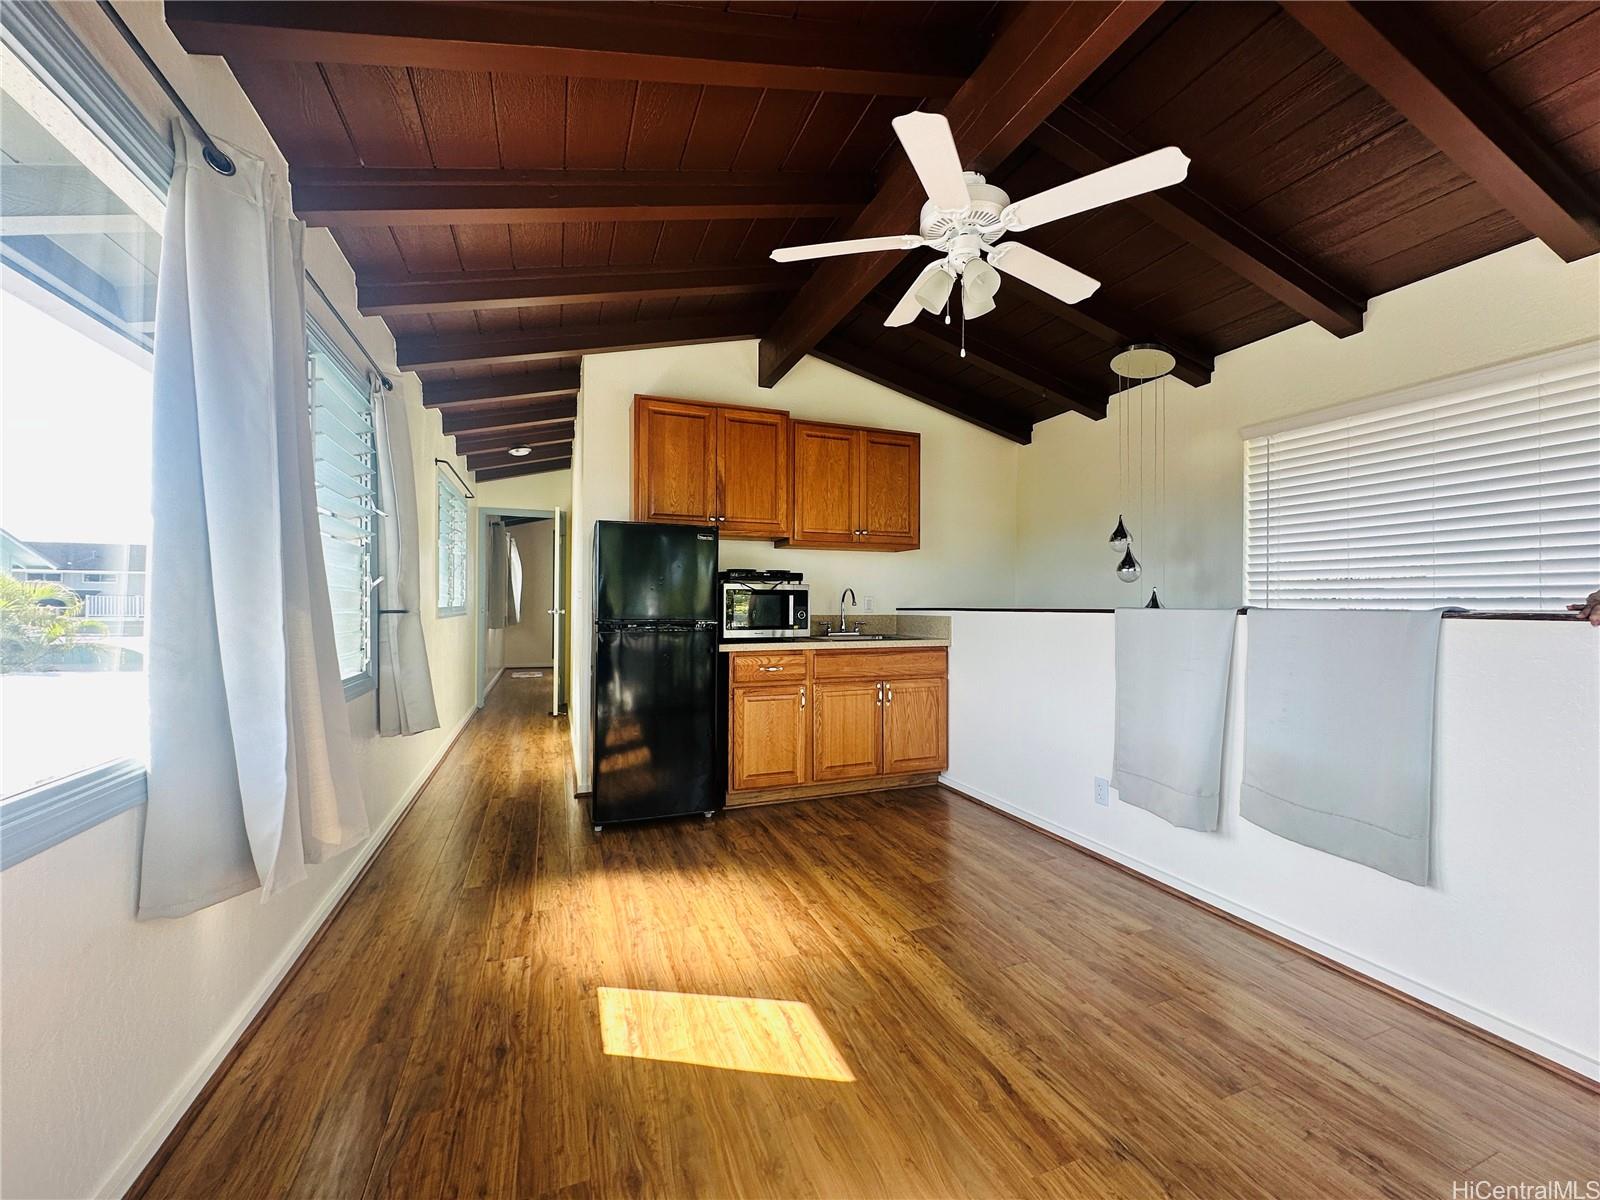 a view of a kitchen with wooden floor a ceiling fan a ceiling fan and wooden floor